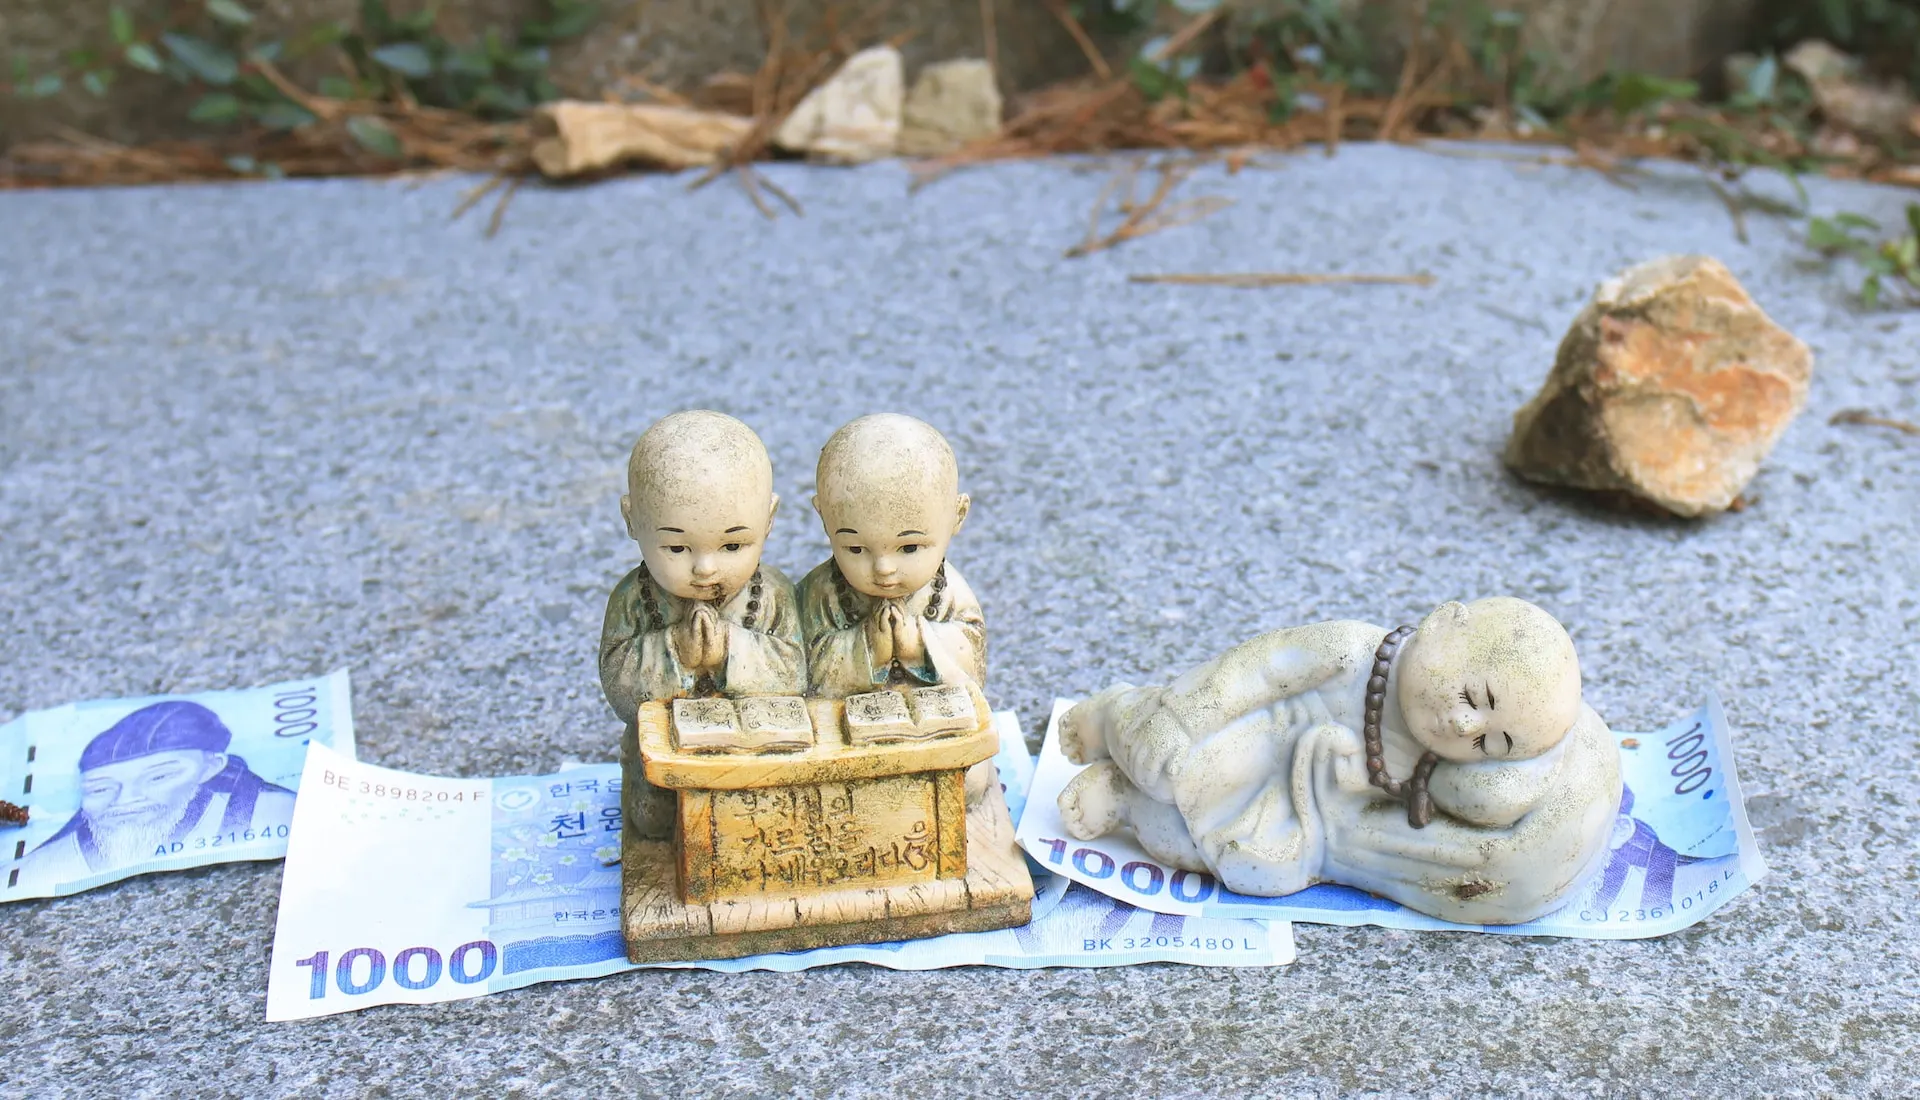 small korean statues used for prayer purposes sit on to of some money donated to the temple